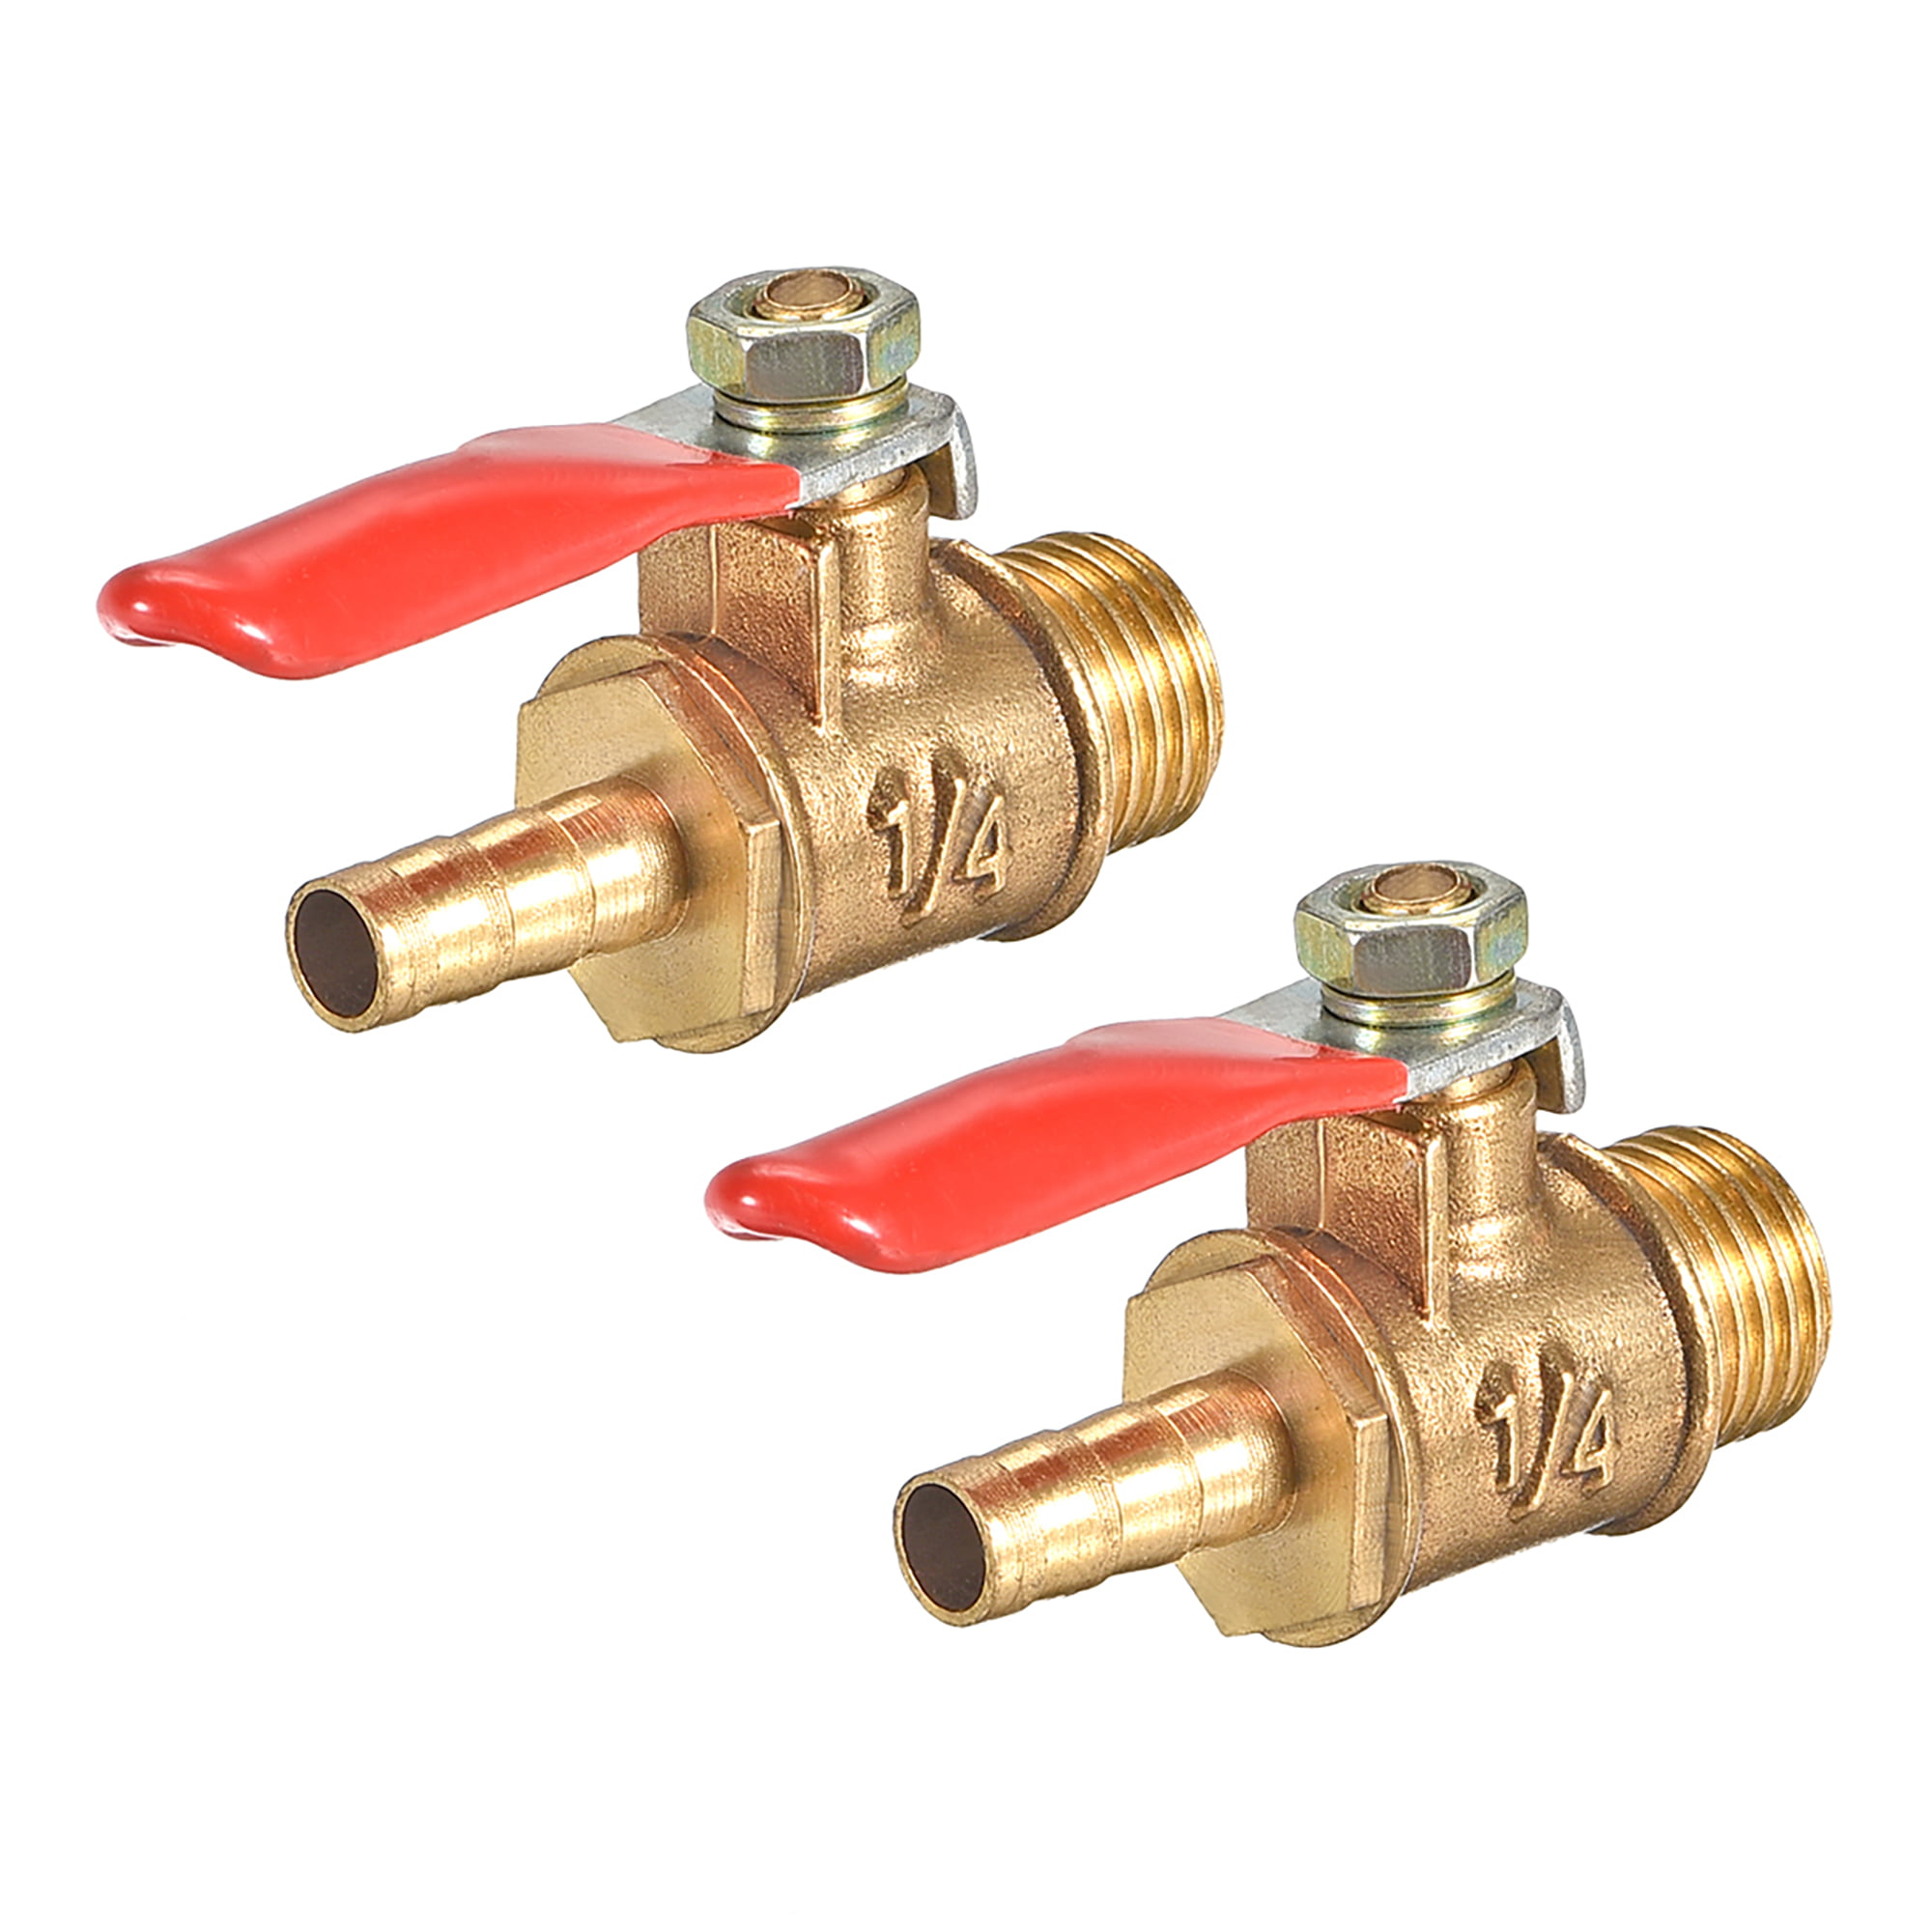 Pack of 2 Tinmovys Brass Ball Valve Shut Off Switch 1/4 Hose Barb to 1/4 Hose Barb Pipe Tubing Fitting Coupler 180 Degree Operation Handle 